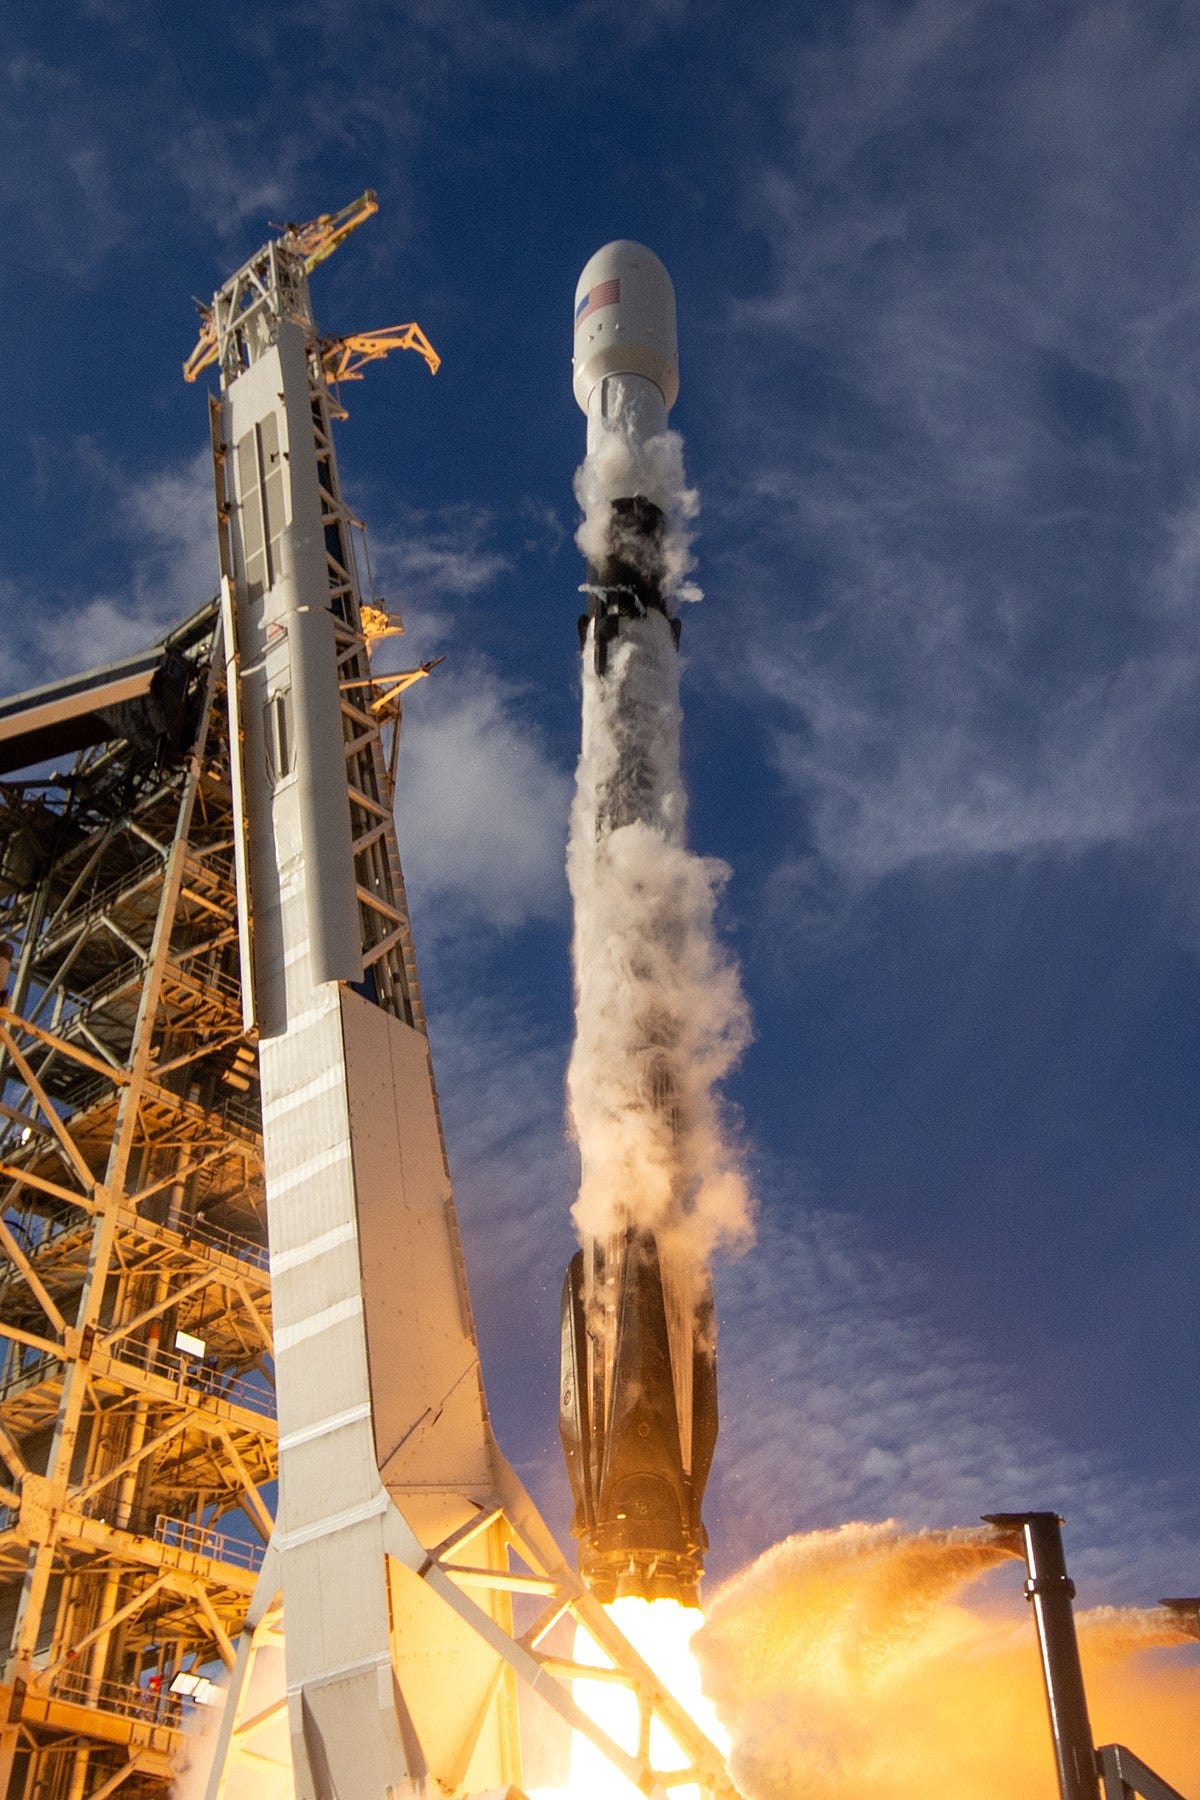 An out-of-control Falcon 9 rocket is about to hit the moon.